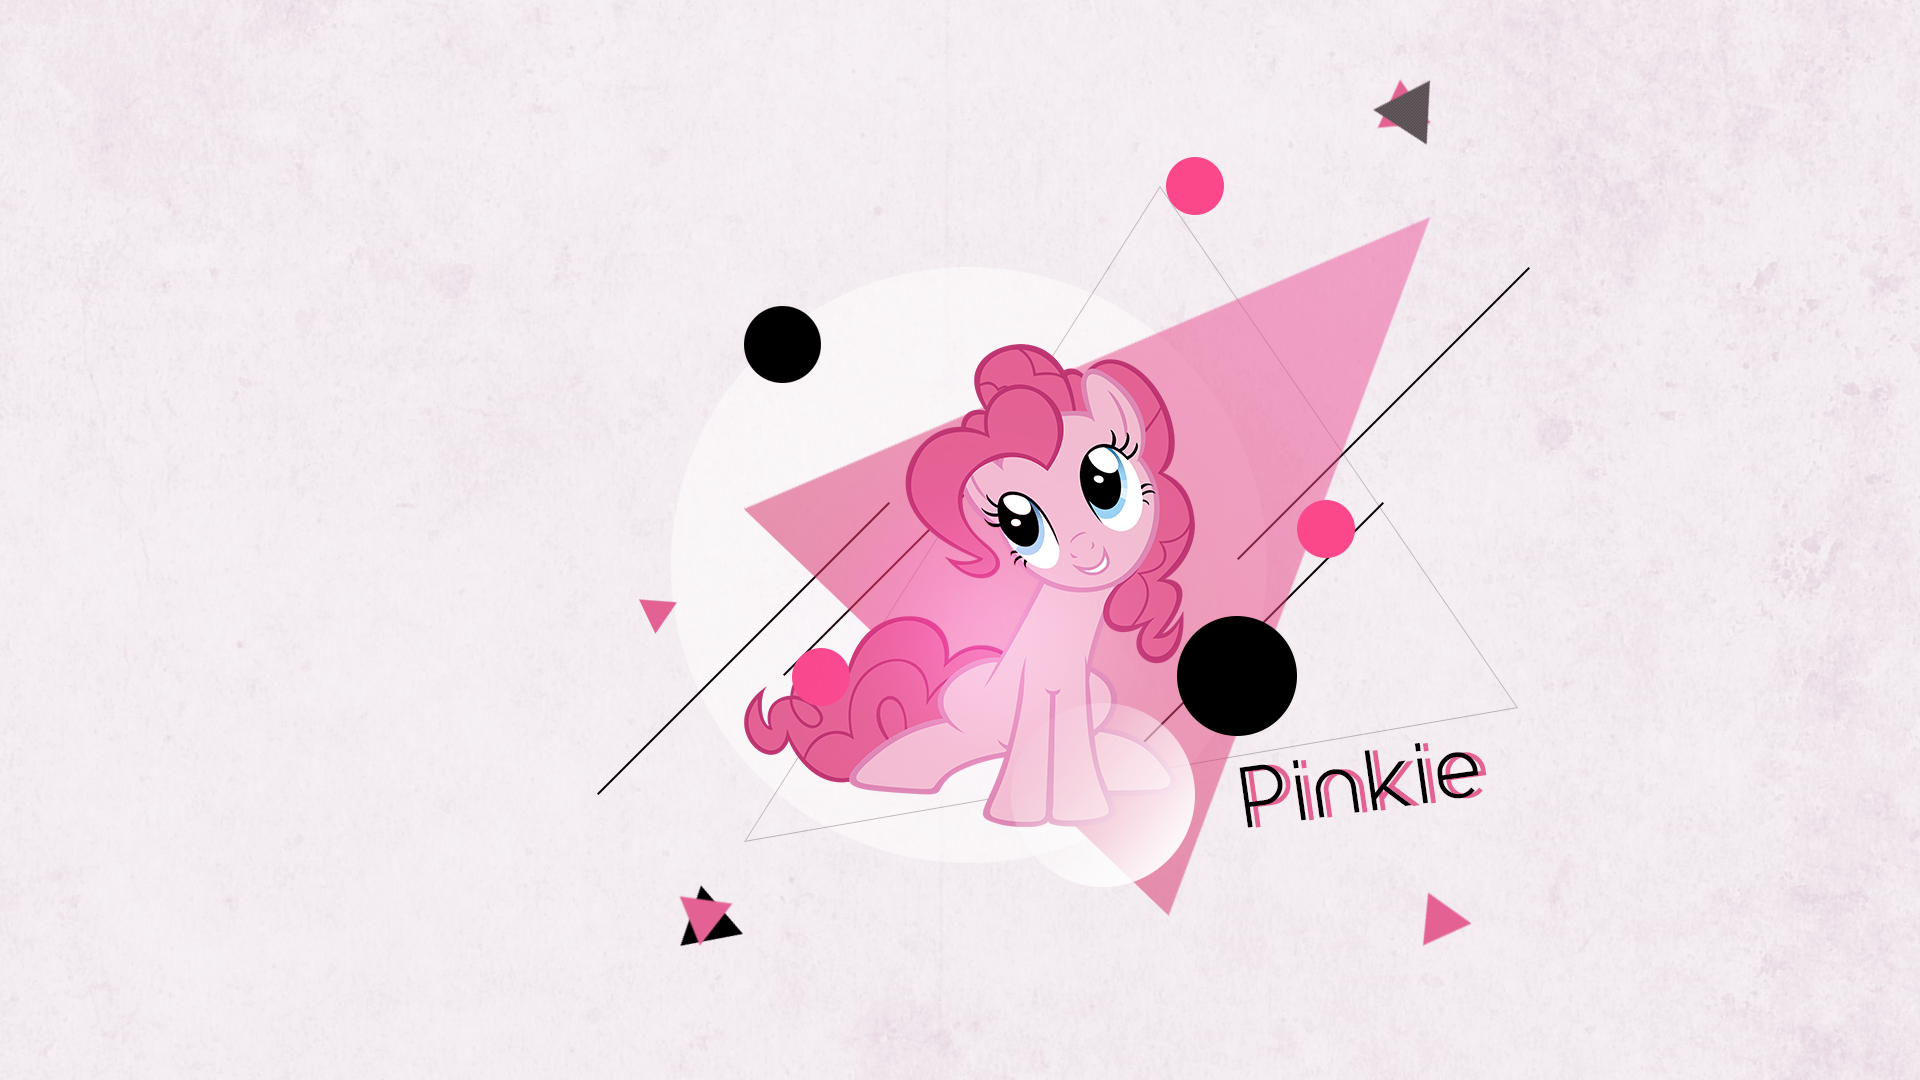 Pinkie shapes by Are-you-jealous and JAVE-the-13